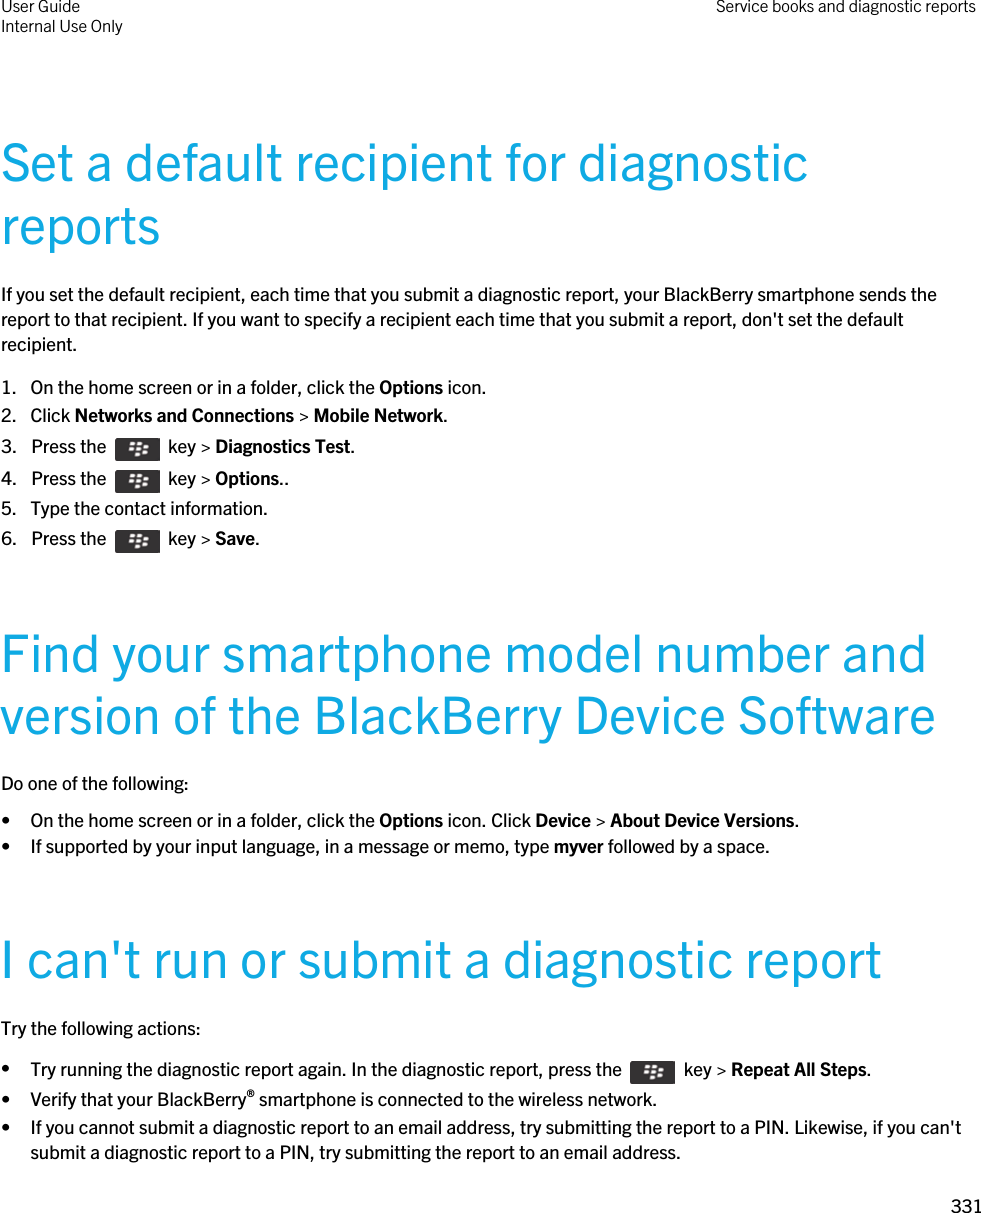 Set a default recipient for diagnostic reportsIf you set the default recipient, each time that you submit a diagnostic report, your BlackBerry smartphone sends the report to that recipient. If you want to specify a recipient each time that you submit a report, don&apos;t set the default recipient.1. On the home screen or in a folder, click the Options icon.2. Click Networks and Connections &gt; Mobile Network.3.  Press the    key &gt; Diagnostics Test. 4.  Press the    key &gt; Options.. 5. Type the contact information.6.  Press the    key &gt; Save. Find your smartphone model number and version of the BlackBerry Device SoftwareDo one of the following:• On the home screen or in a folder, click the Options icon. Click Device &gt; About Device Versions.• If supported by your input language, in a message or memo, type myver followed by a space.I can&apos;t run or submit a diagnostic reportTry the following actions:•Try running the diagnostic report again. In the diagnostic report, press the    key &gt; Repeat All Steps.• Verify that your BlackBerry® smartphone is connected to the wireless network.• If you cannot submit a diagnostic report to an email address, try submitting the report to a PIN. Likewise, if you can&apos;t submit a diagnostic report to a PIN, try submitting the report to an email address.User GuideInternal Use Only Service books and diagnostic reports331 